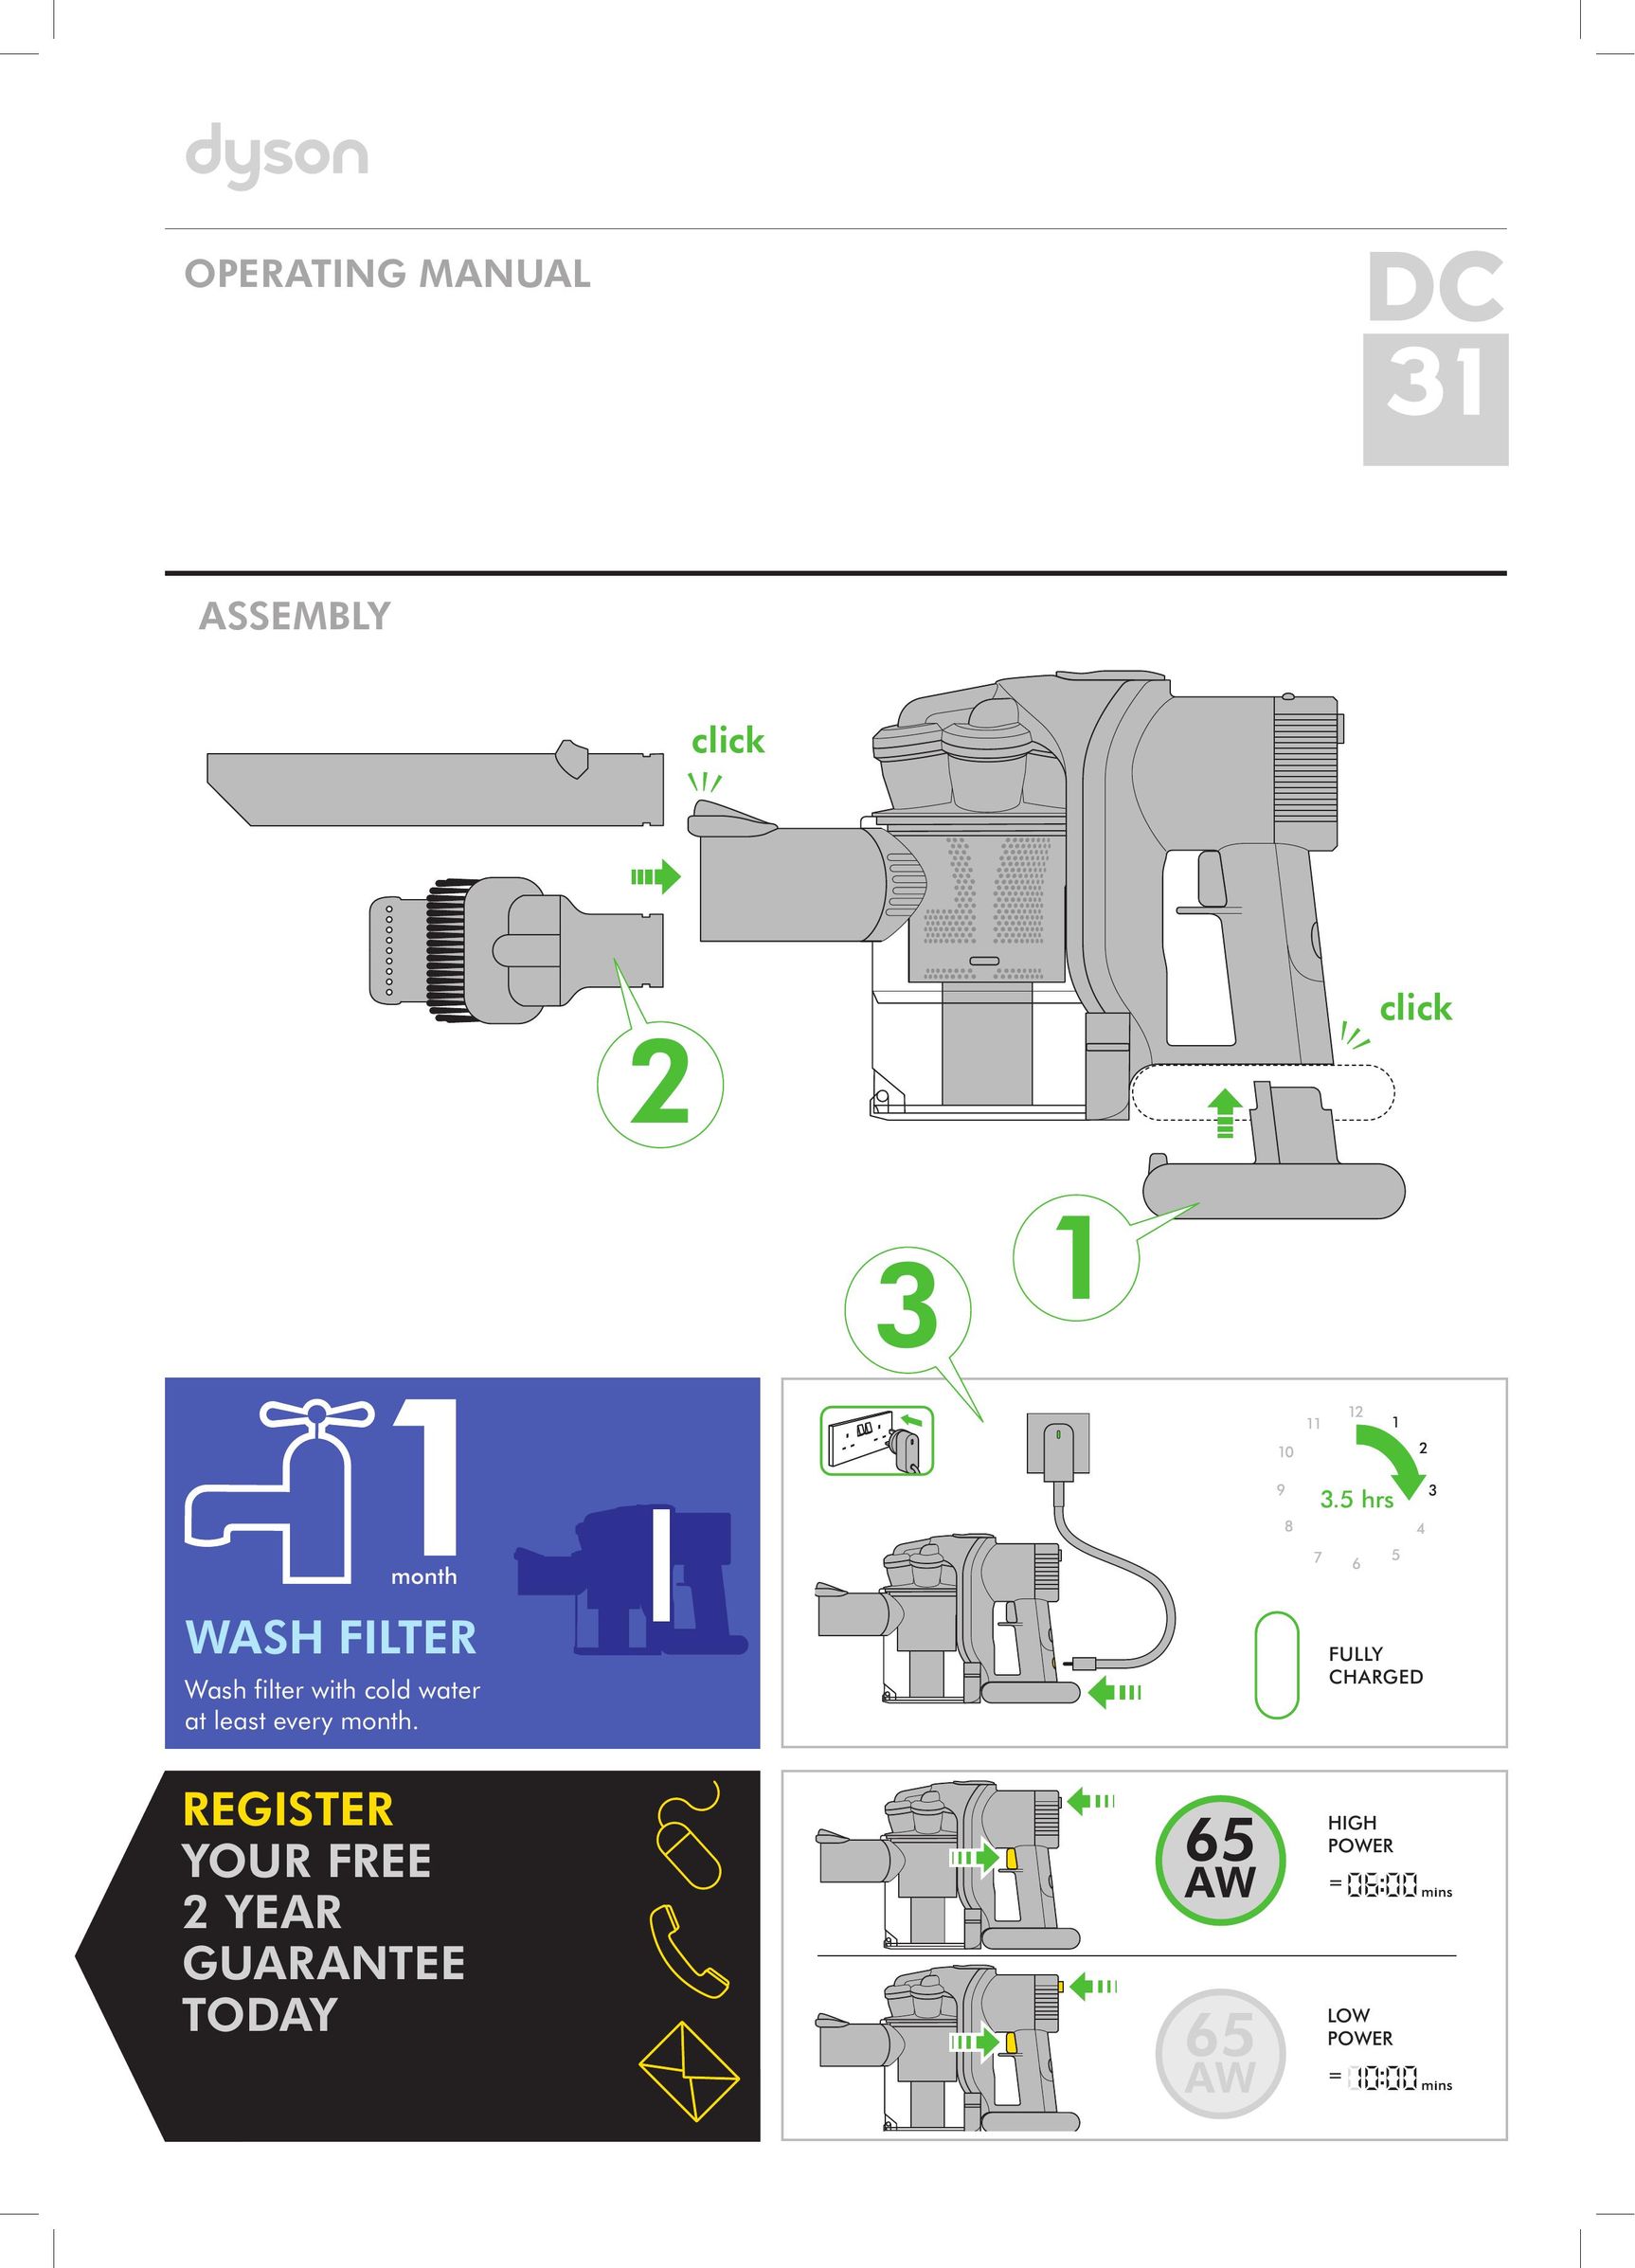 Dyson DC 31 Vacuum Cleaner User Manual